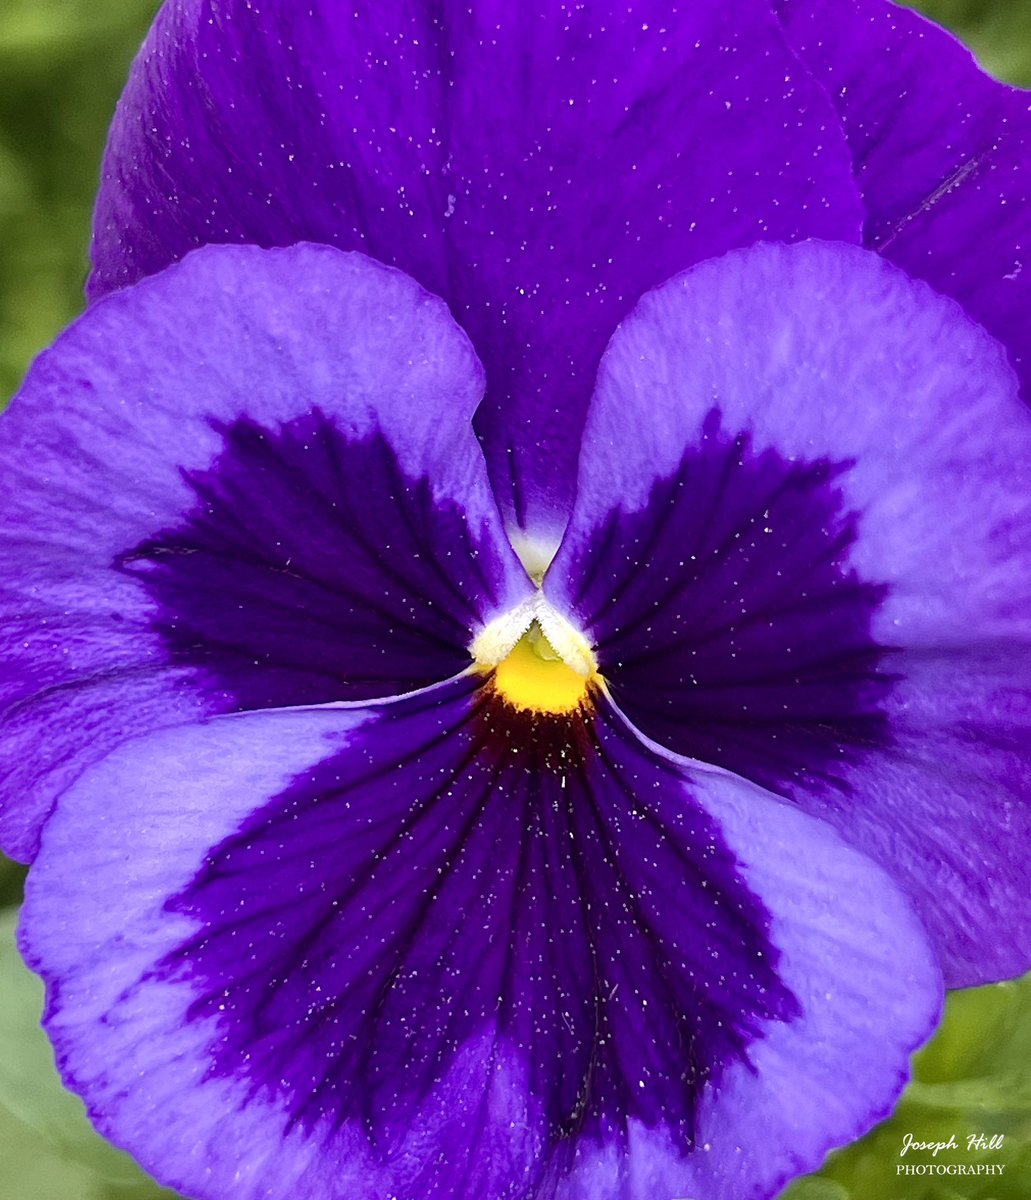 Pansy🌸
Photo By: Joseph Hill🙂📸🌸

#Pansy🌸 #flower #nature #closeup #beautiful #colorful #Peaceful #spring #flowerphotography #SouthernPinesNC #April